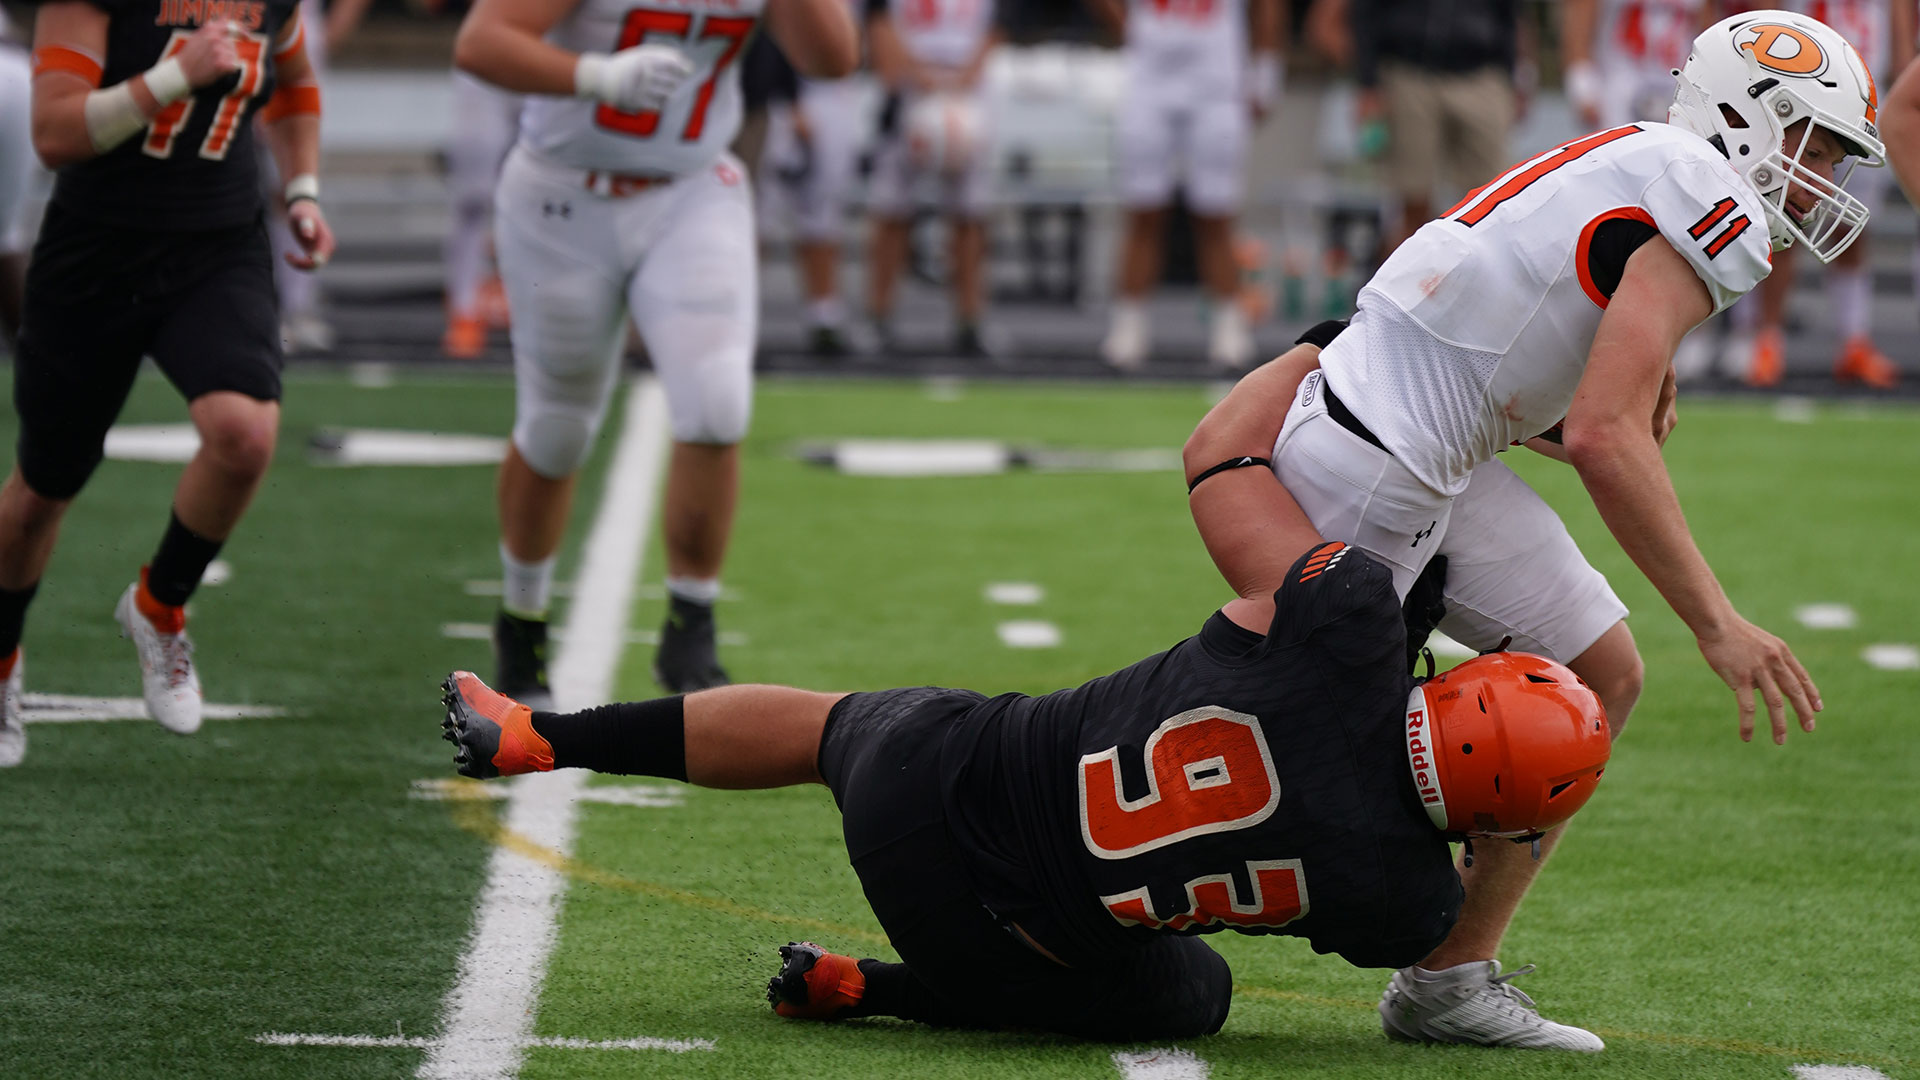 The Jimmies' Tyler Dean (93) records one of his three sacks in Saturday's 10-7 win over Doane (Neb.) / Photo by Alex Maida